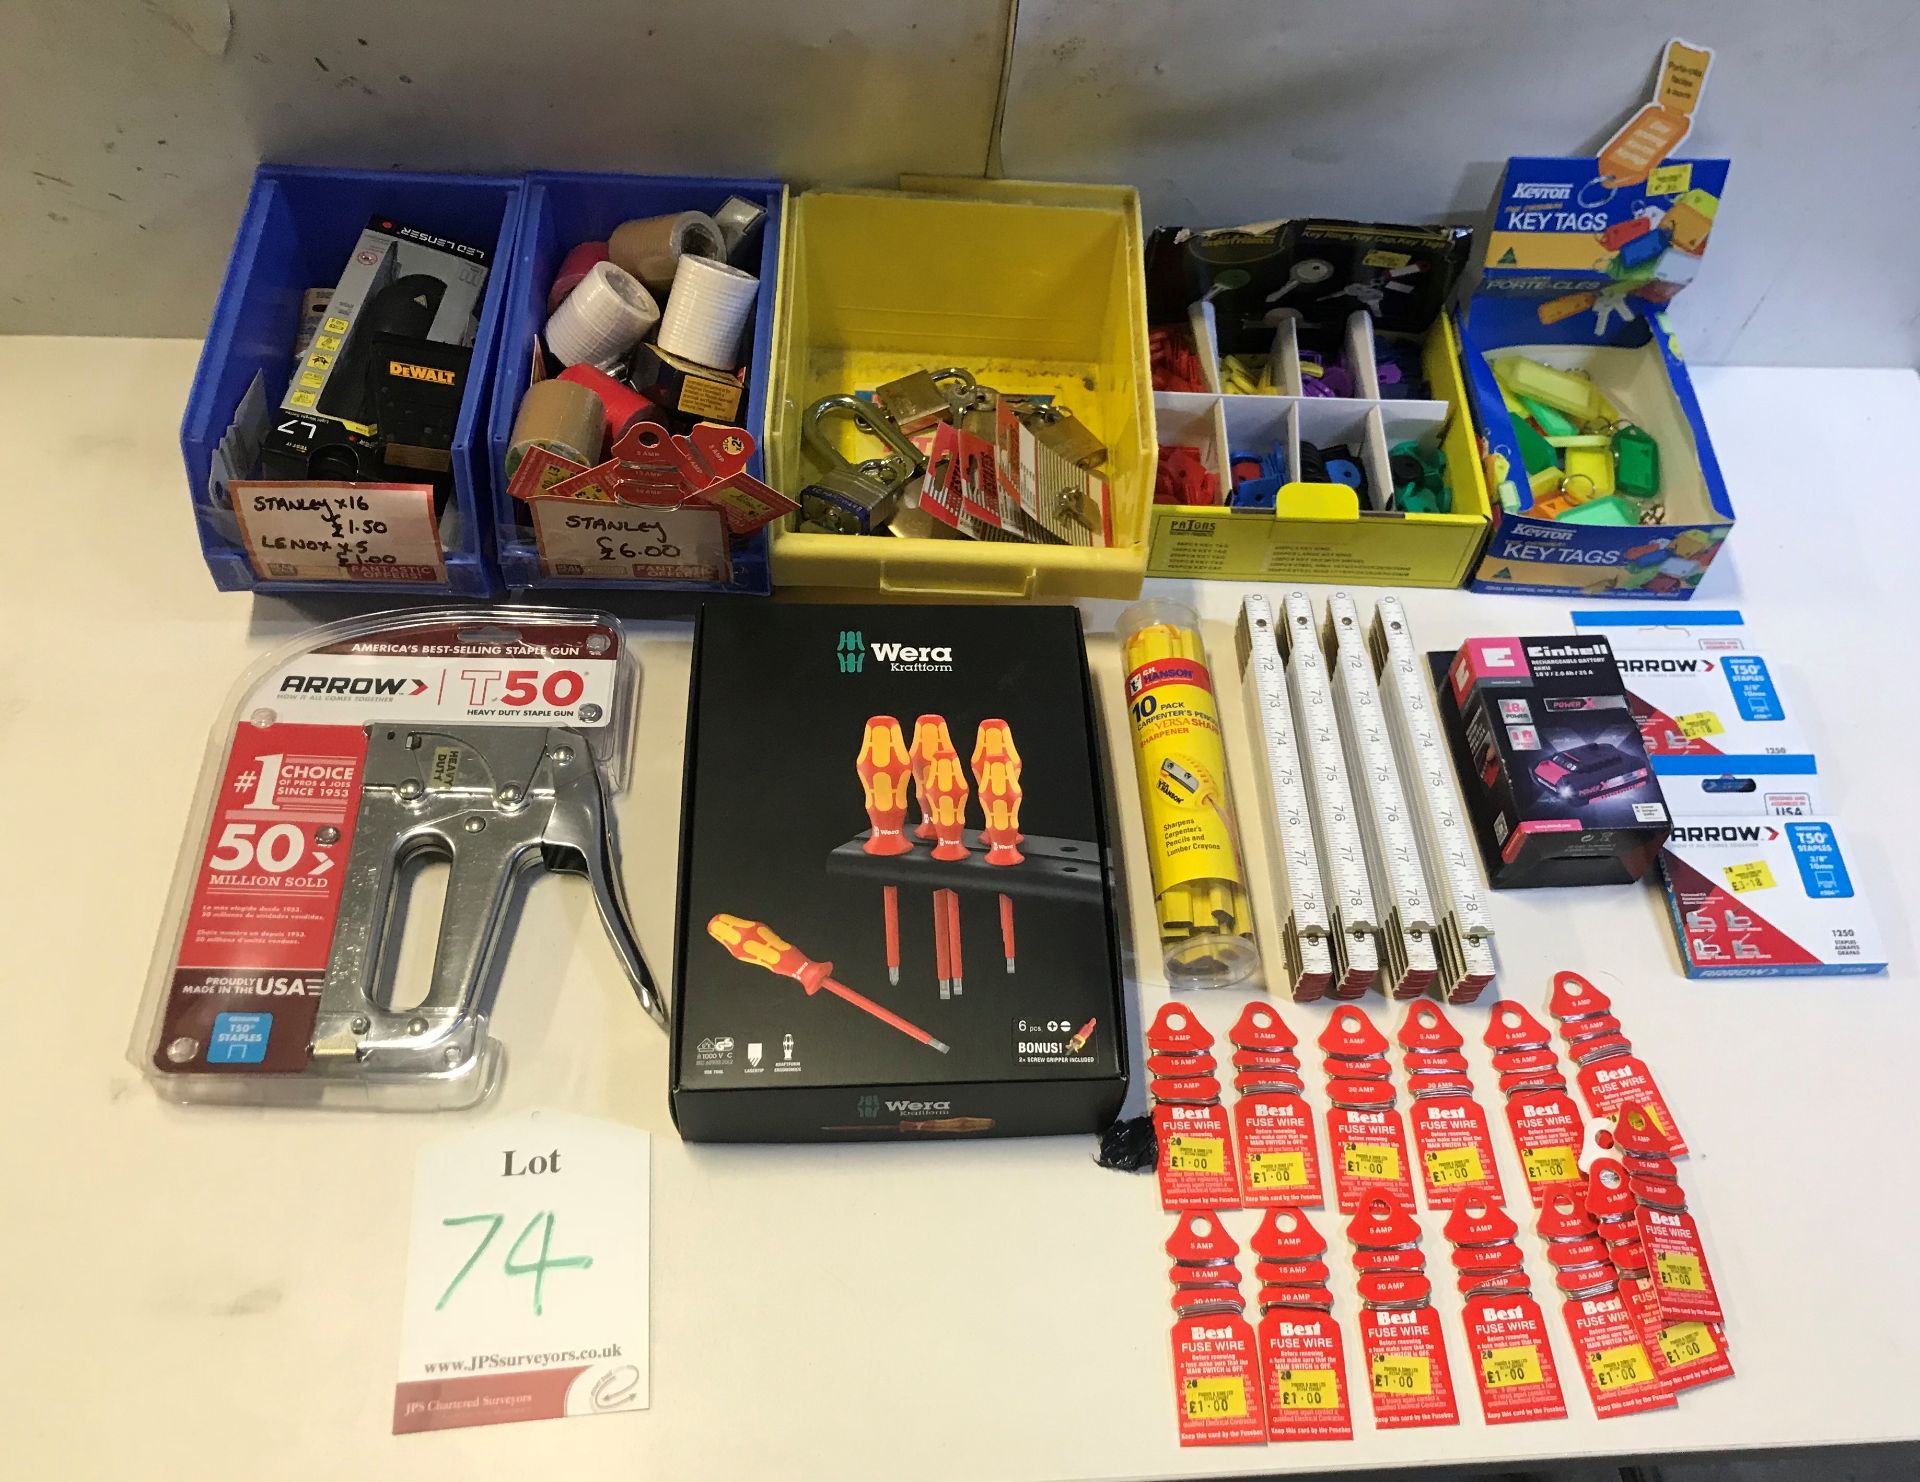 Mixed lot consisting of Rulers, Pencils, Fuse Wire, Staple Gun, Spare Blades, Tool Sets, Keyring etc